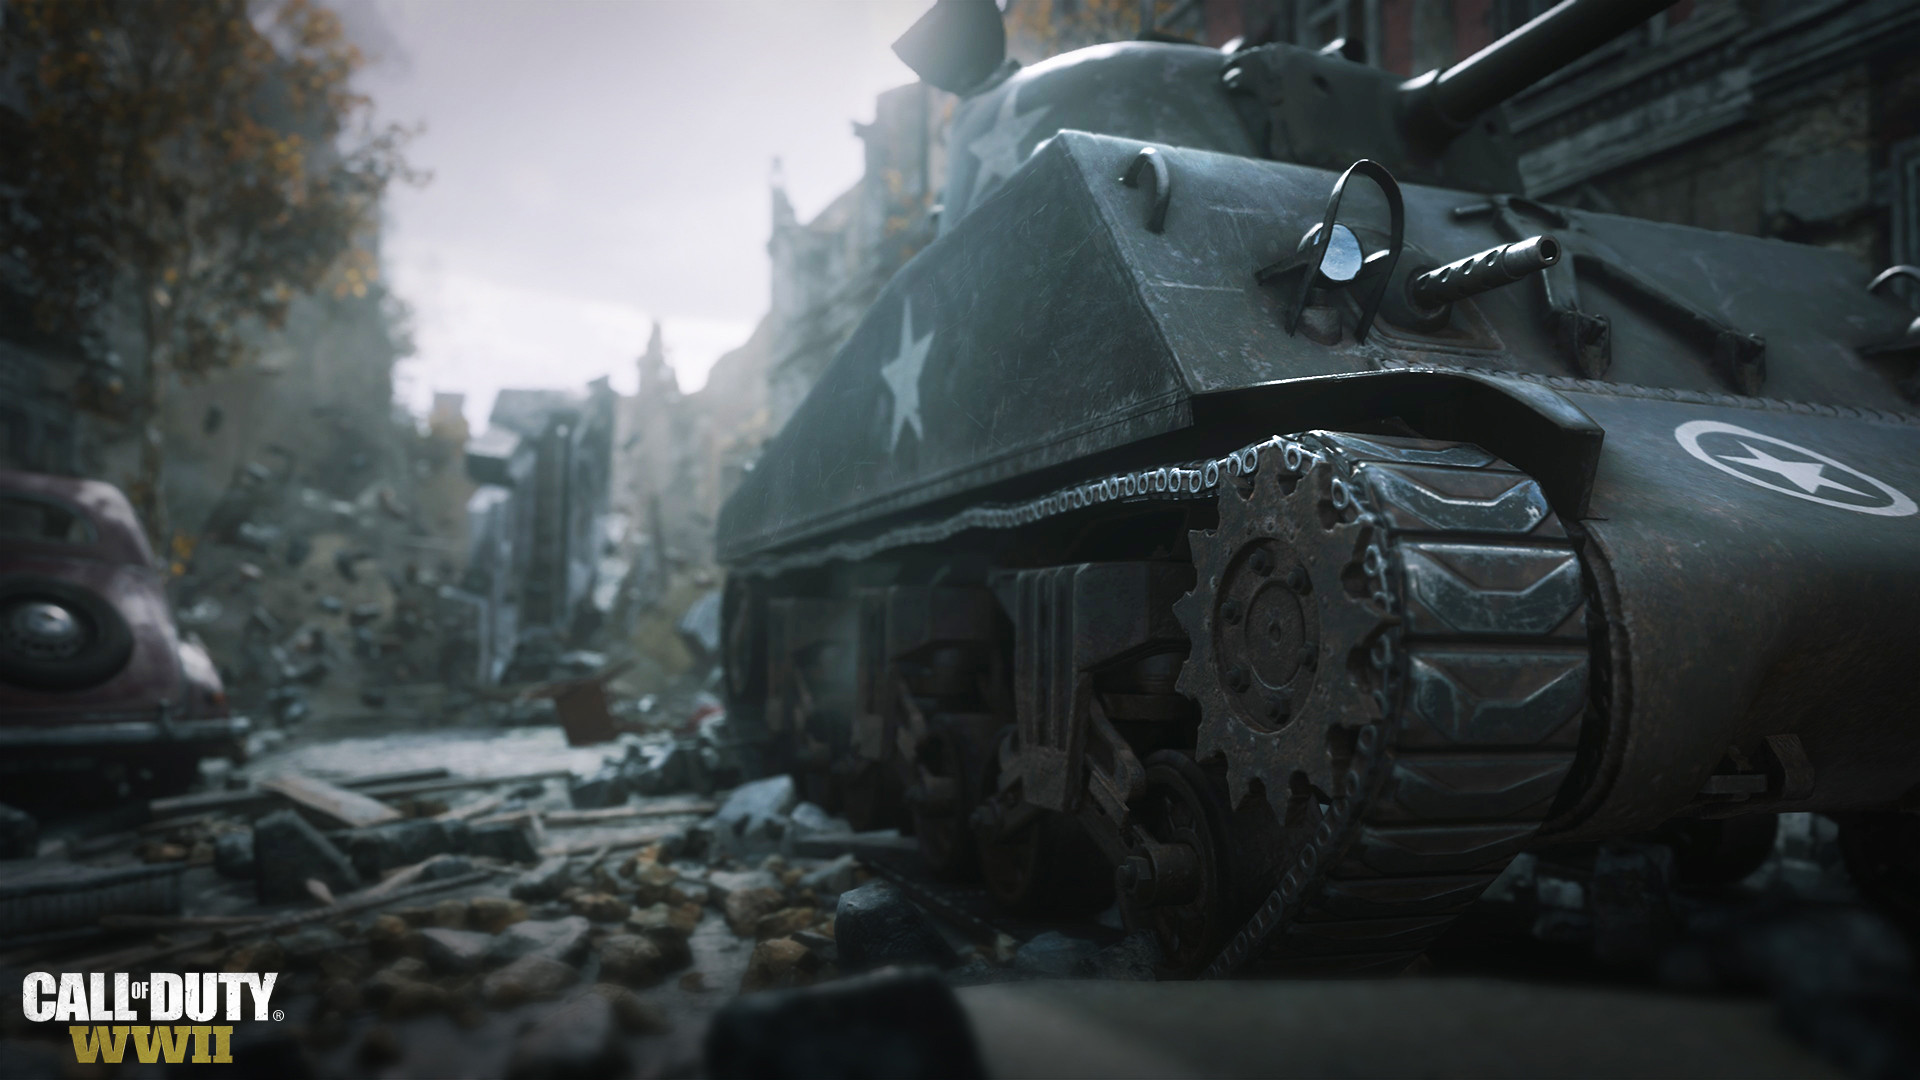 Call Of Duty Call Of Duty WWii Video Games Tank War PC Gaming 1920x1080